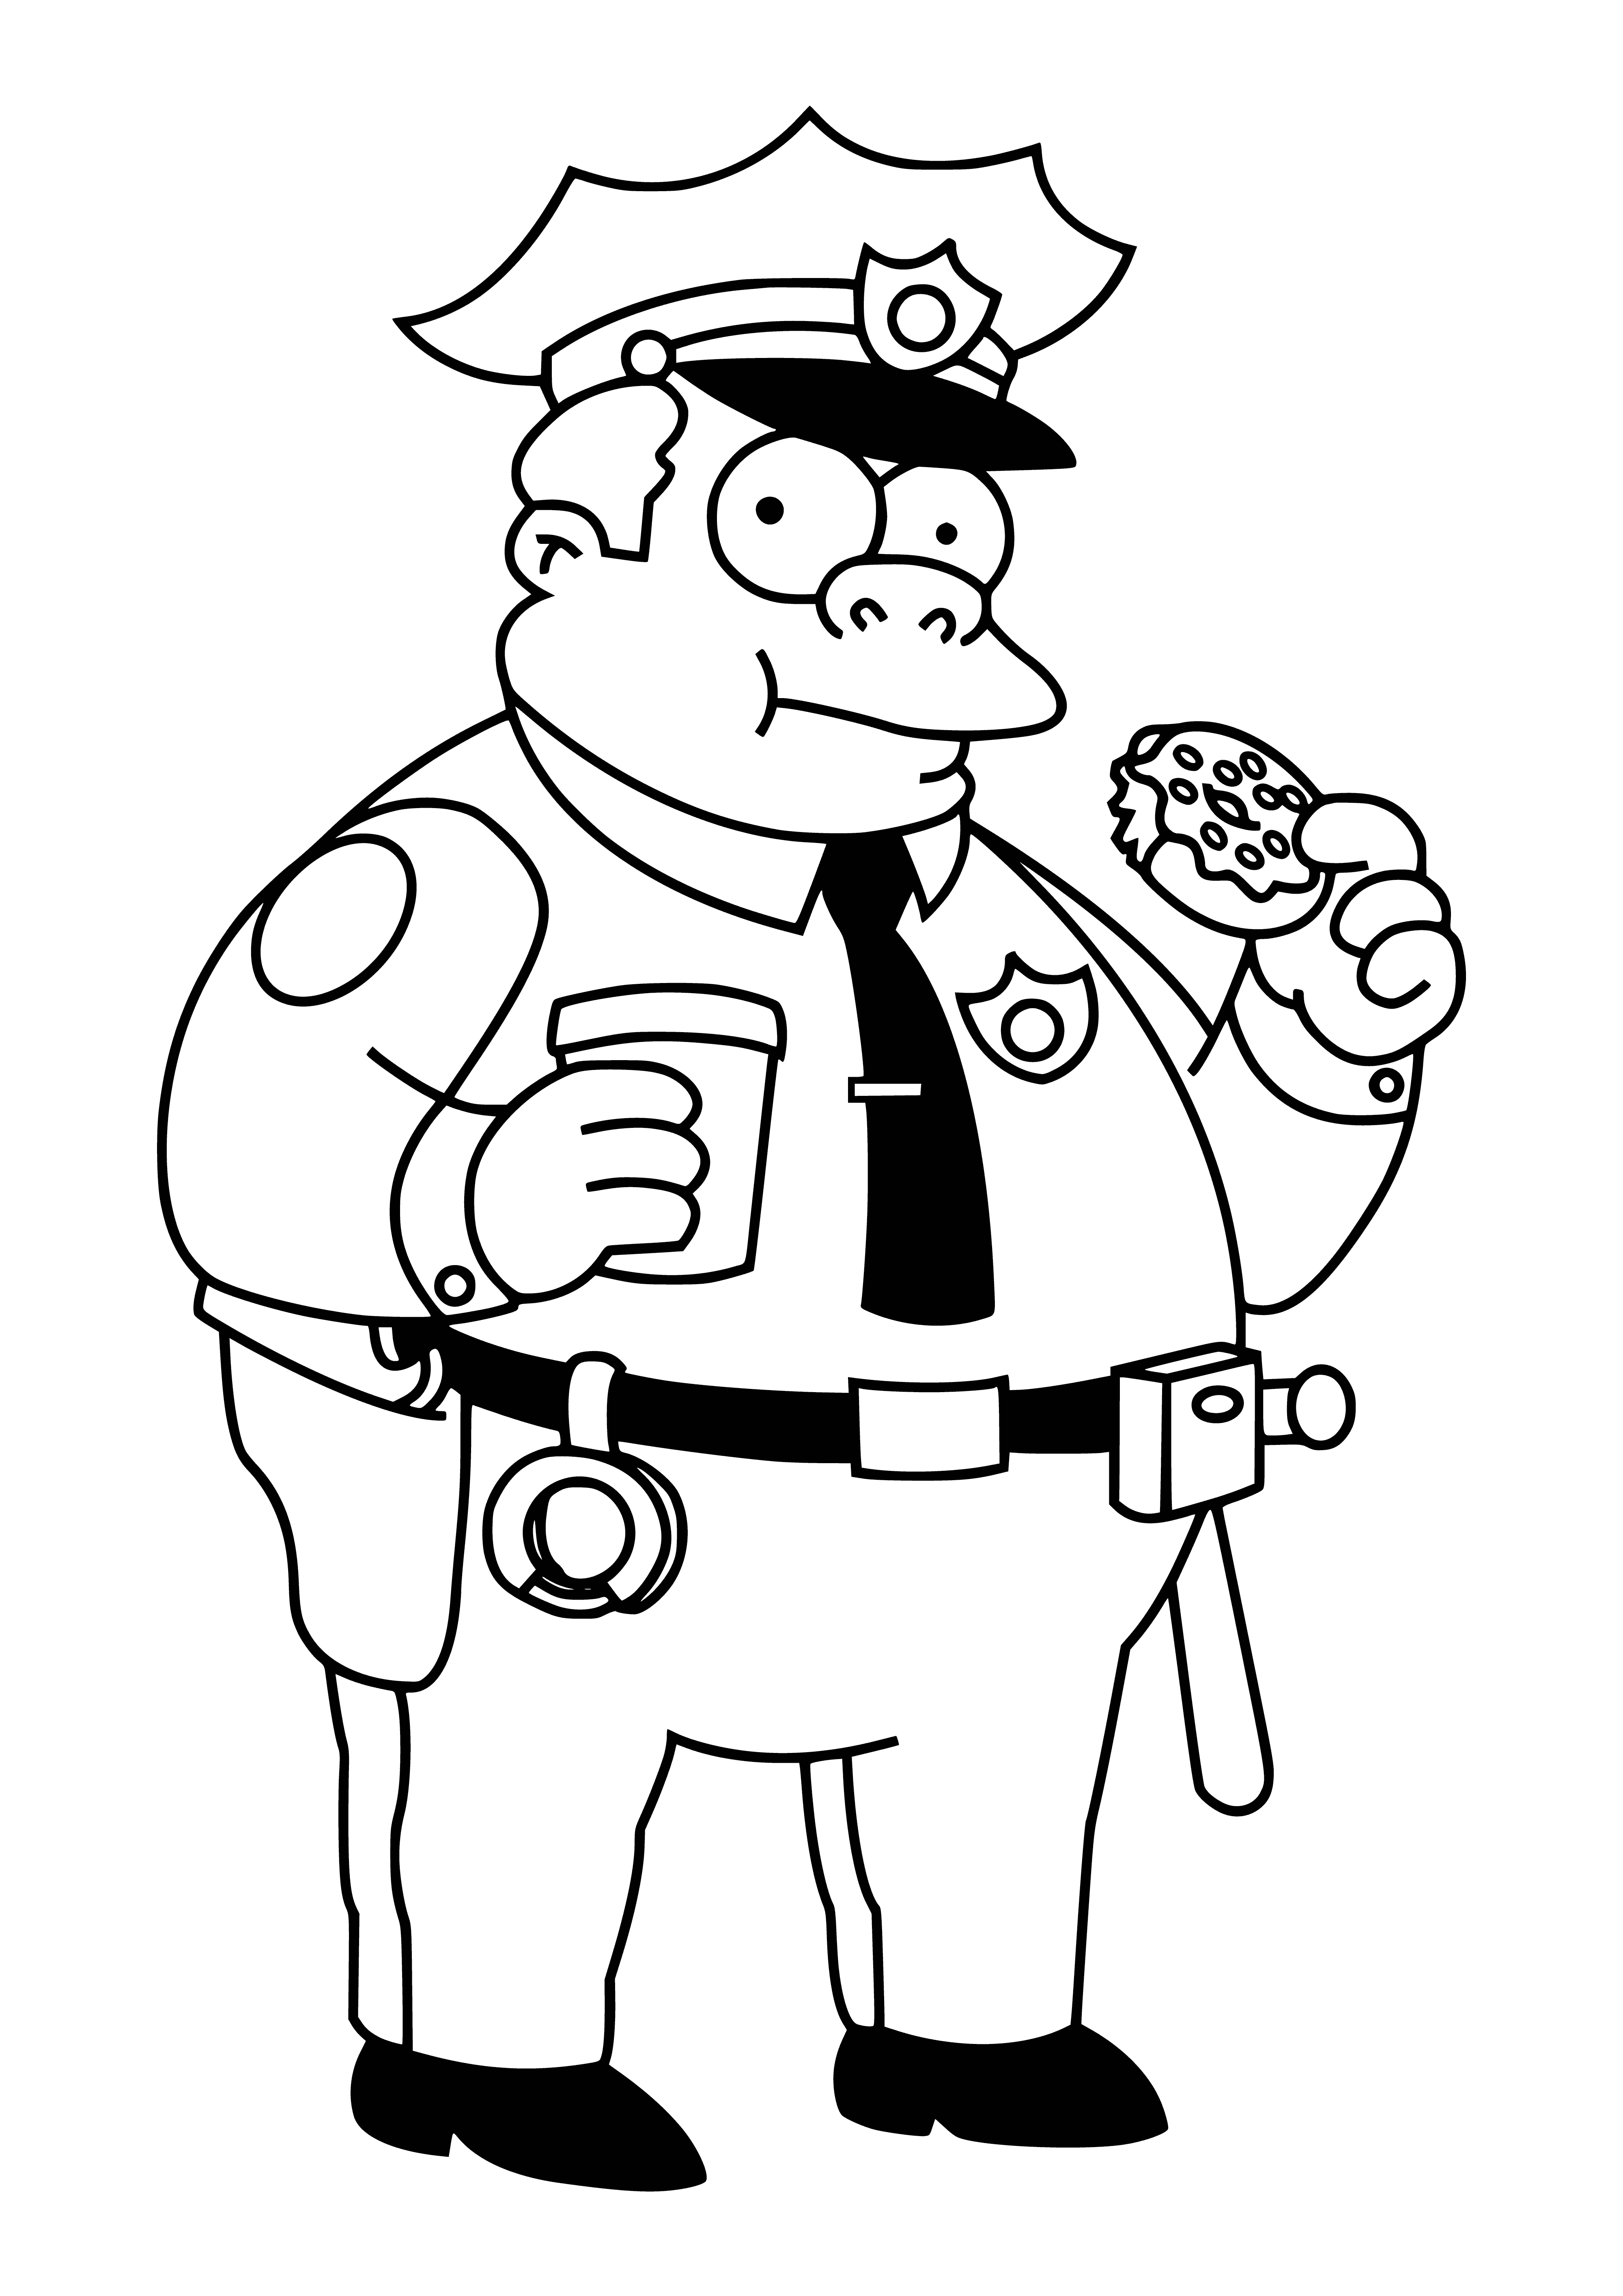 coloring page: Police Chief Clancy Wiggum looks unkempt & bored, his stained uniform and cigar ash not helping. He doesn't take his job seriously.